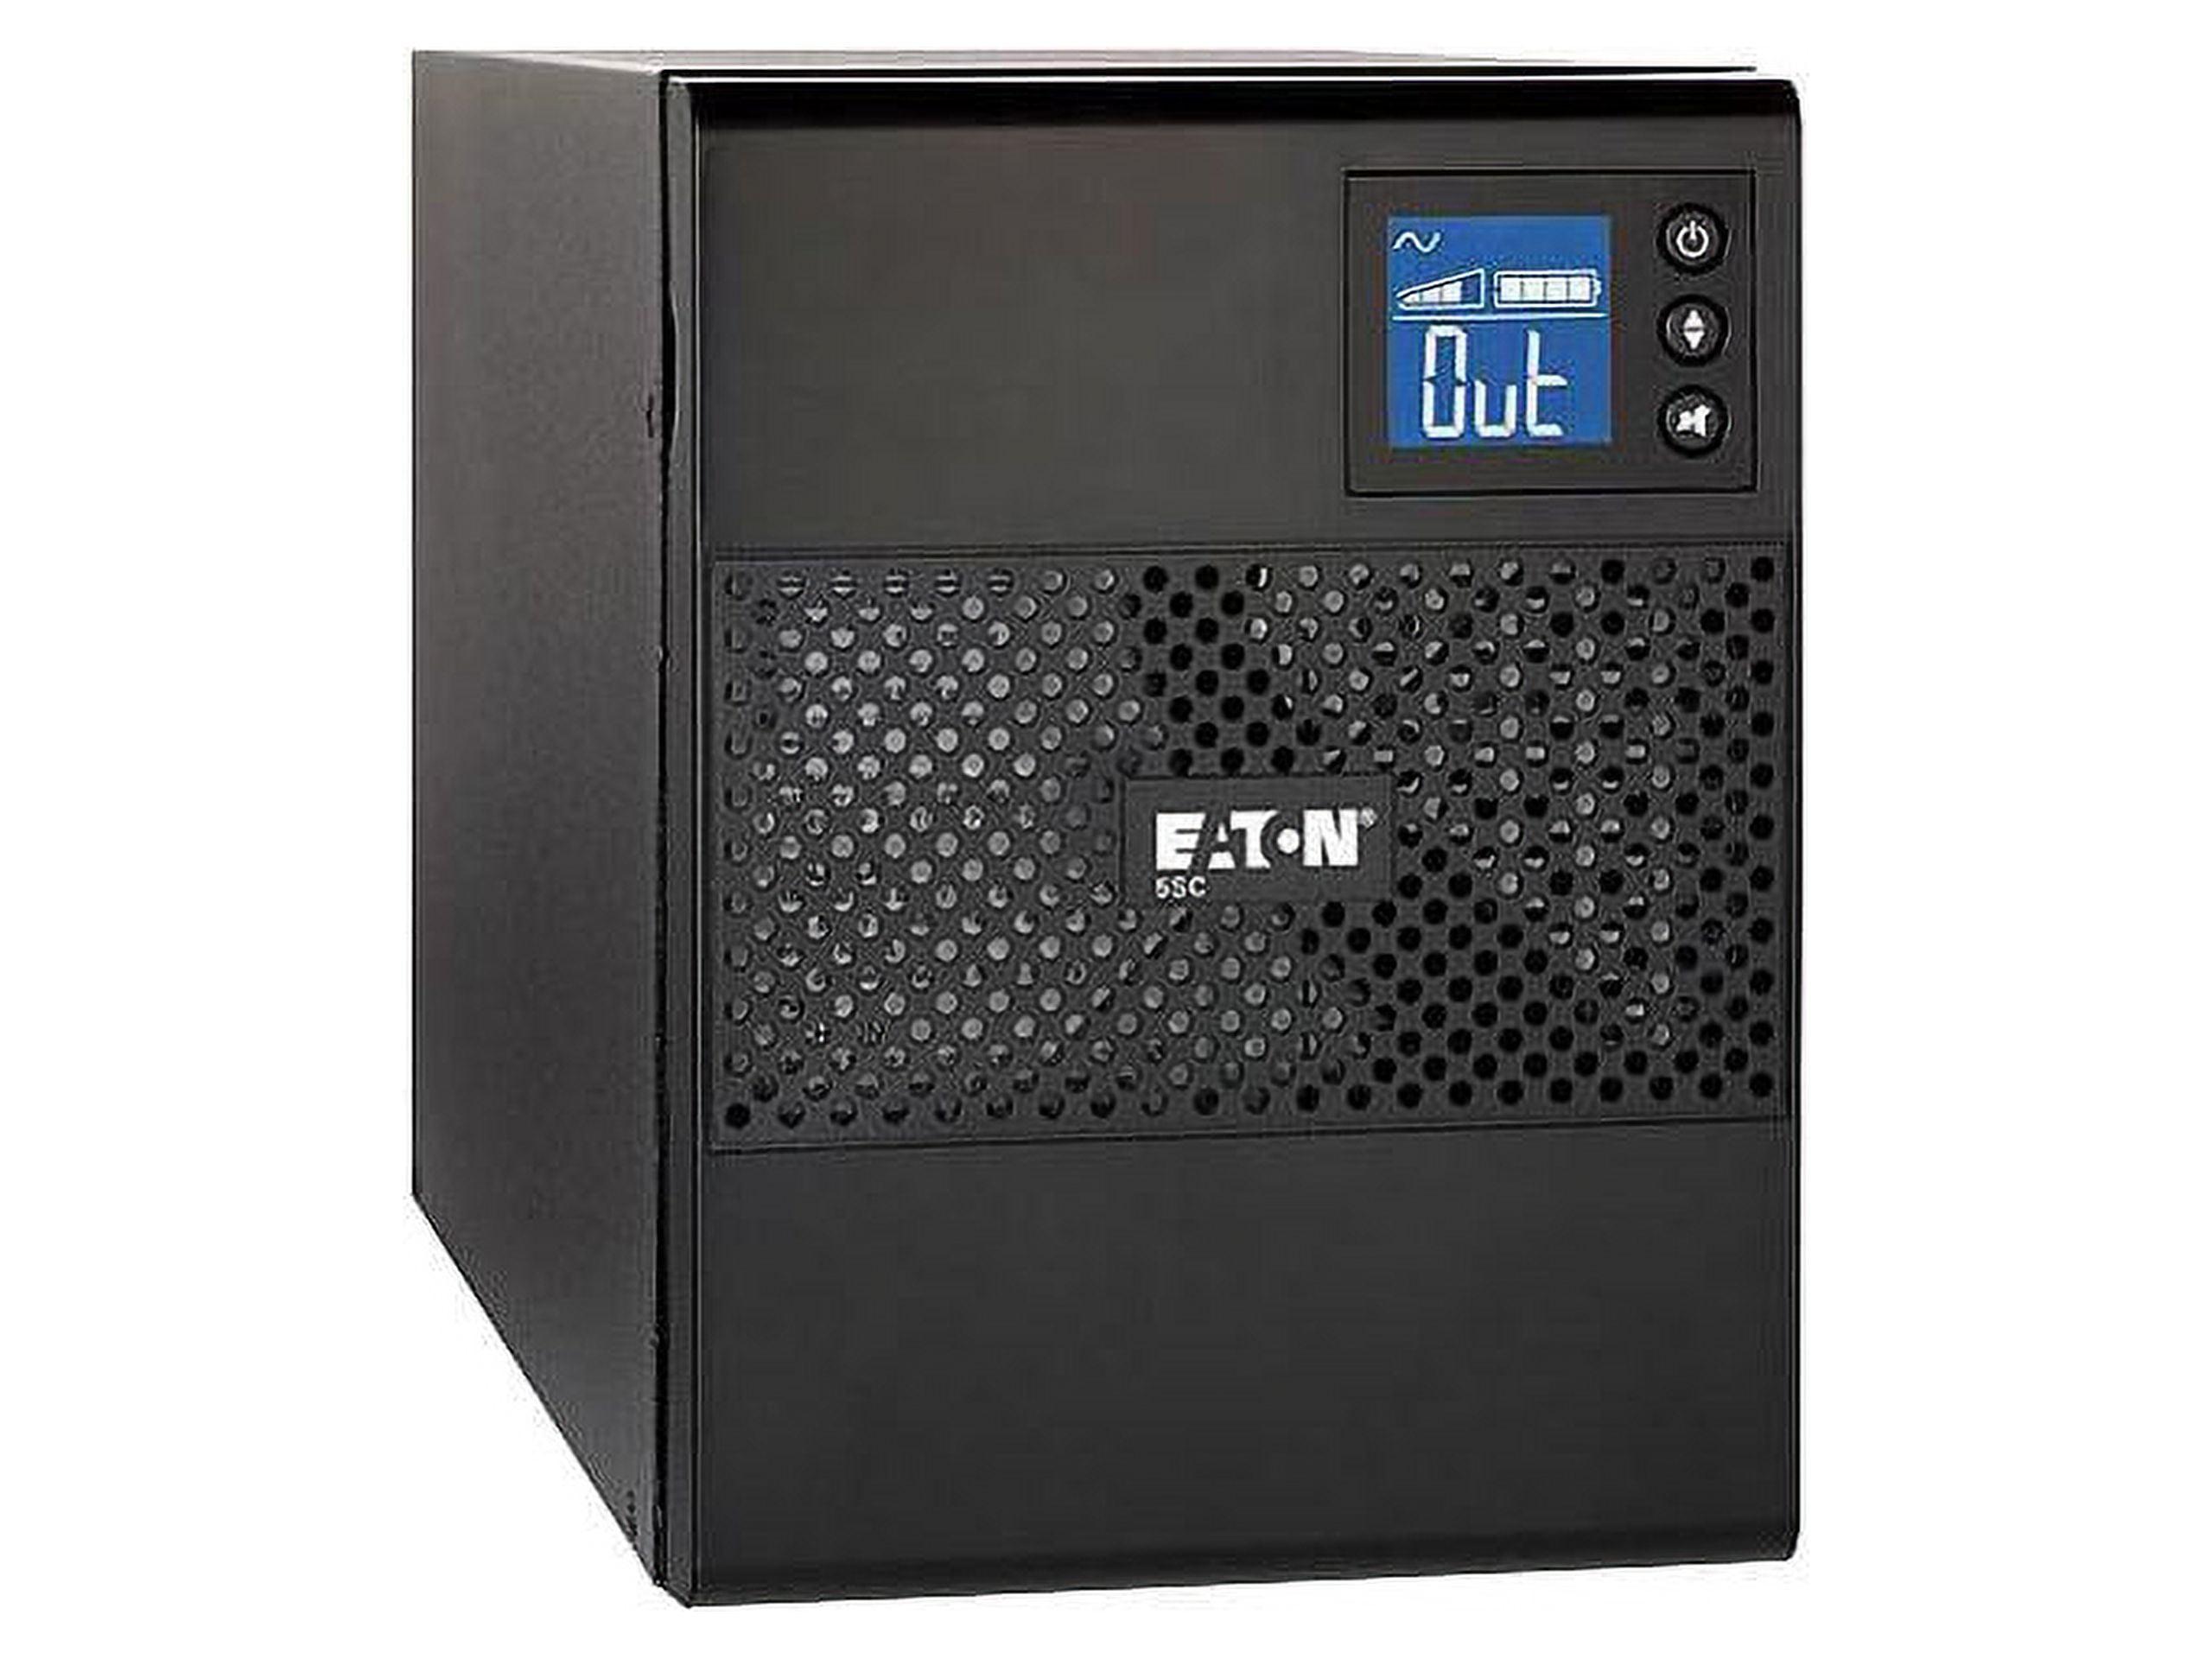 Eaton Compact 525W Tower UPS with LCD Display and Sinewave Output